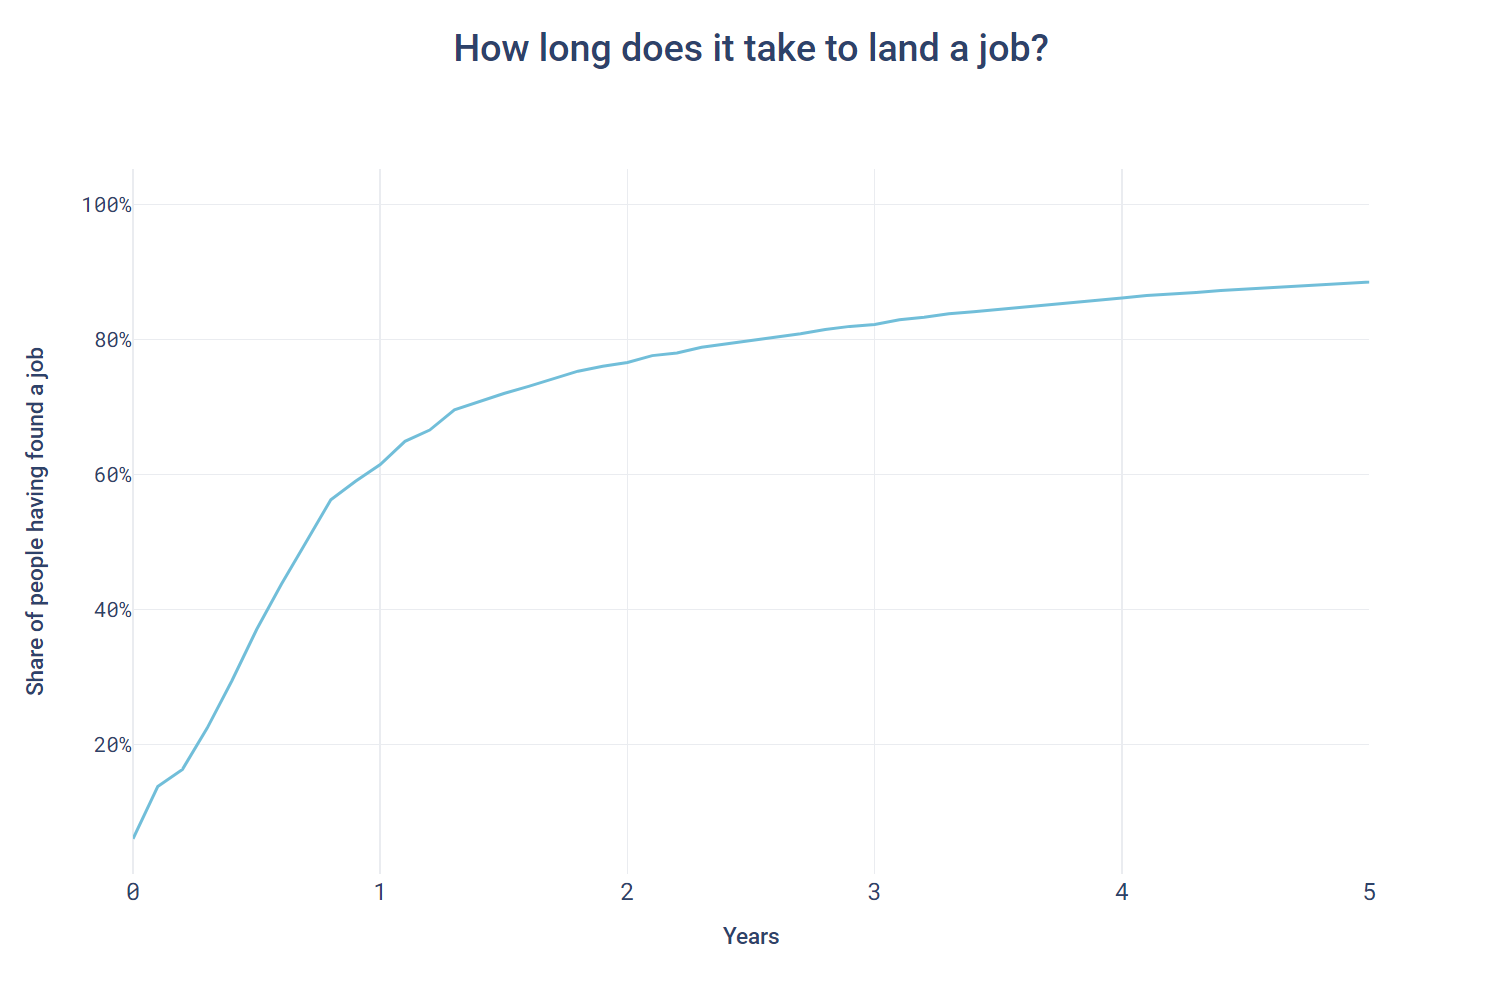 How long does it take to land a job?